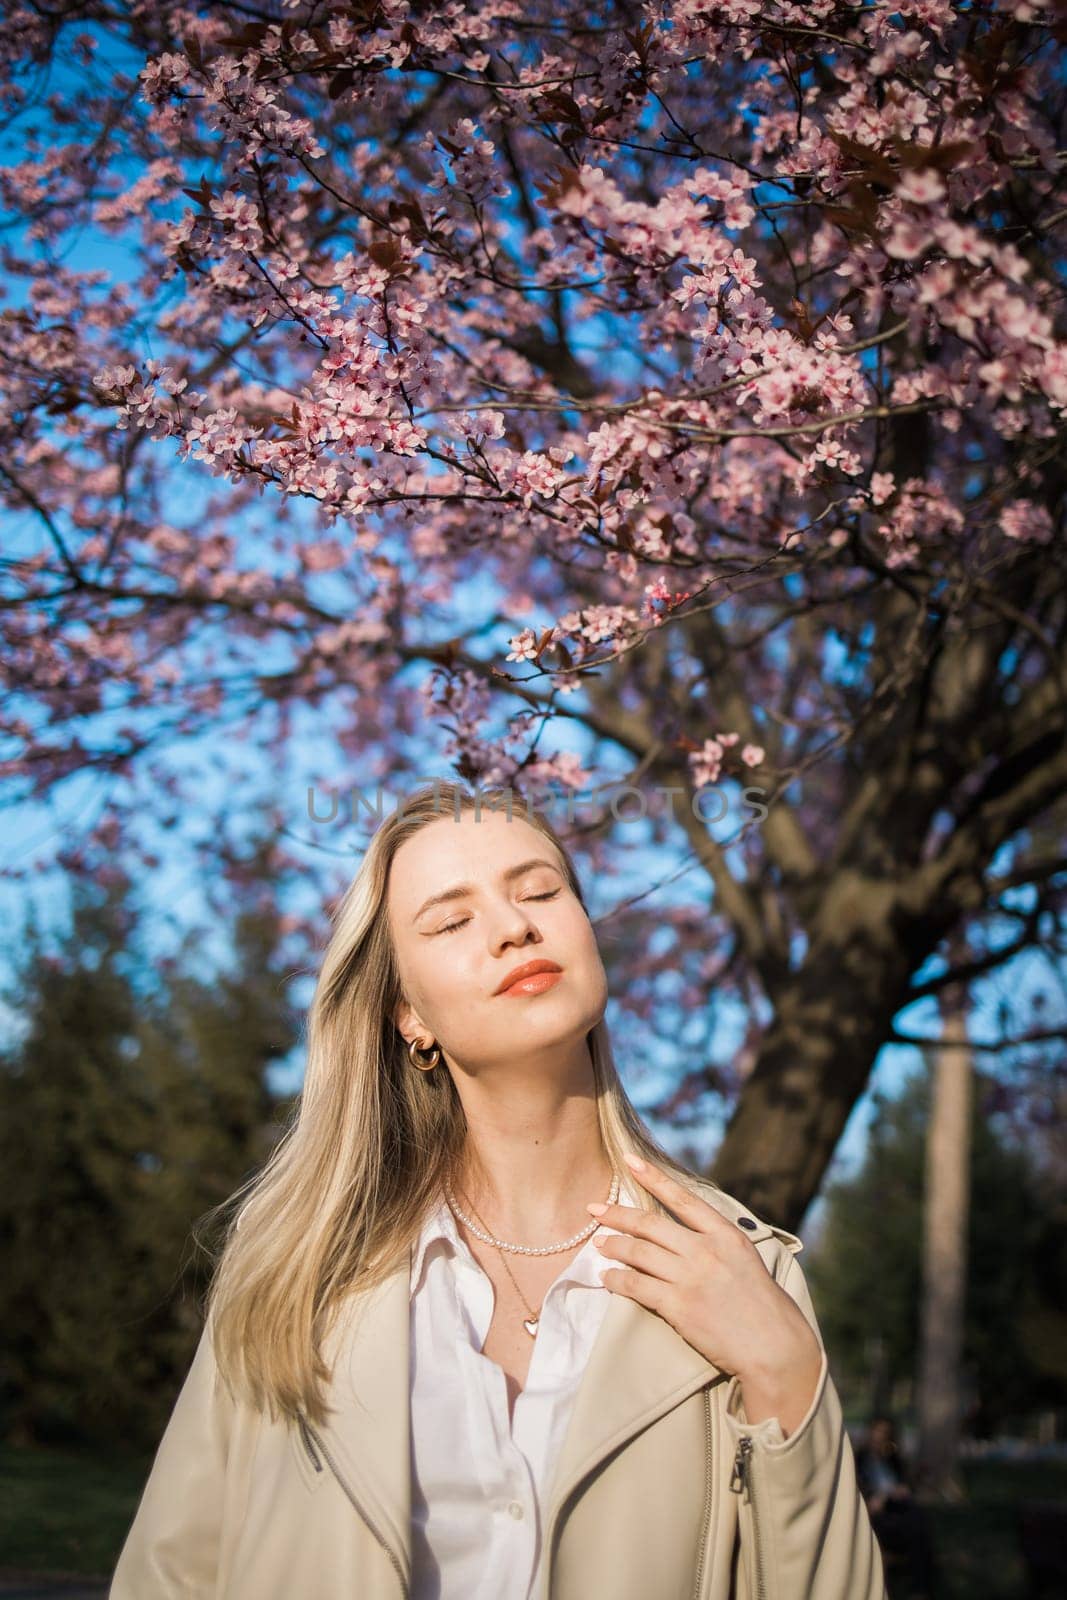 Fashion outdoor photo of beautiful woman with blond hair in elegant suit posing in spring flowering park with blooming cherry tree. Copy space and empty place for advertising text by Satura86